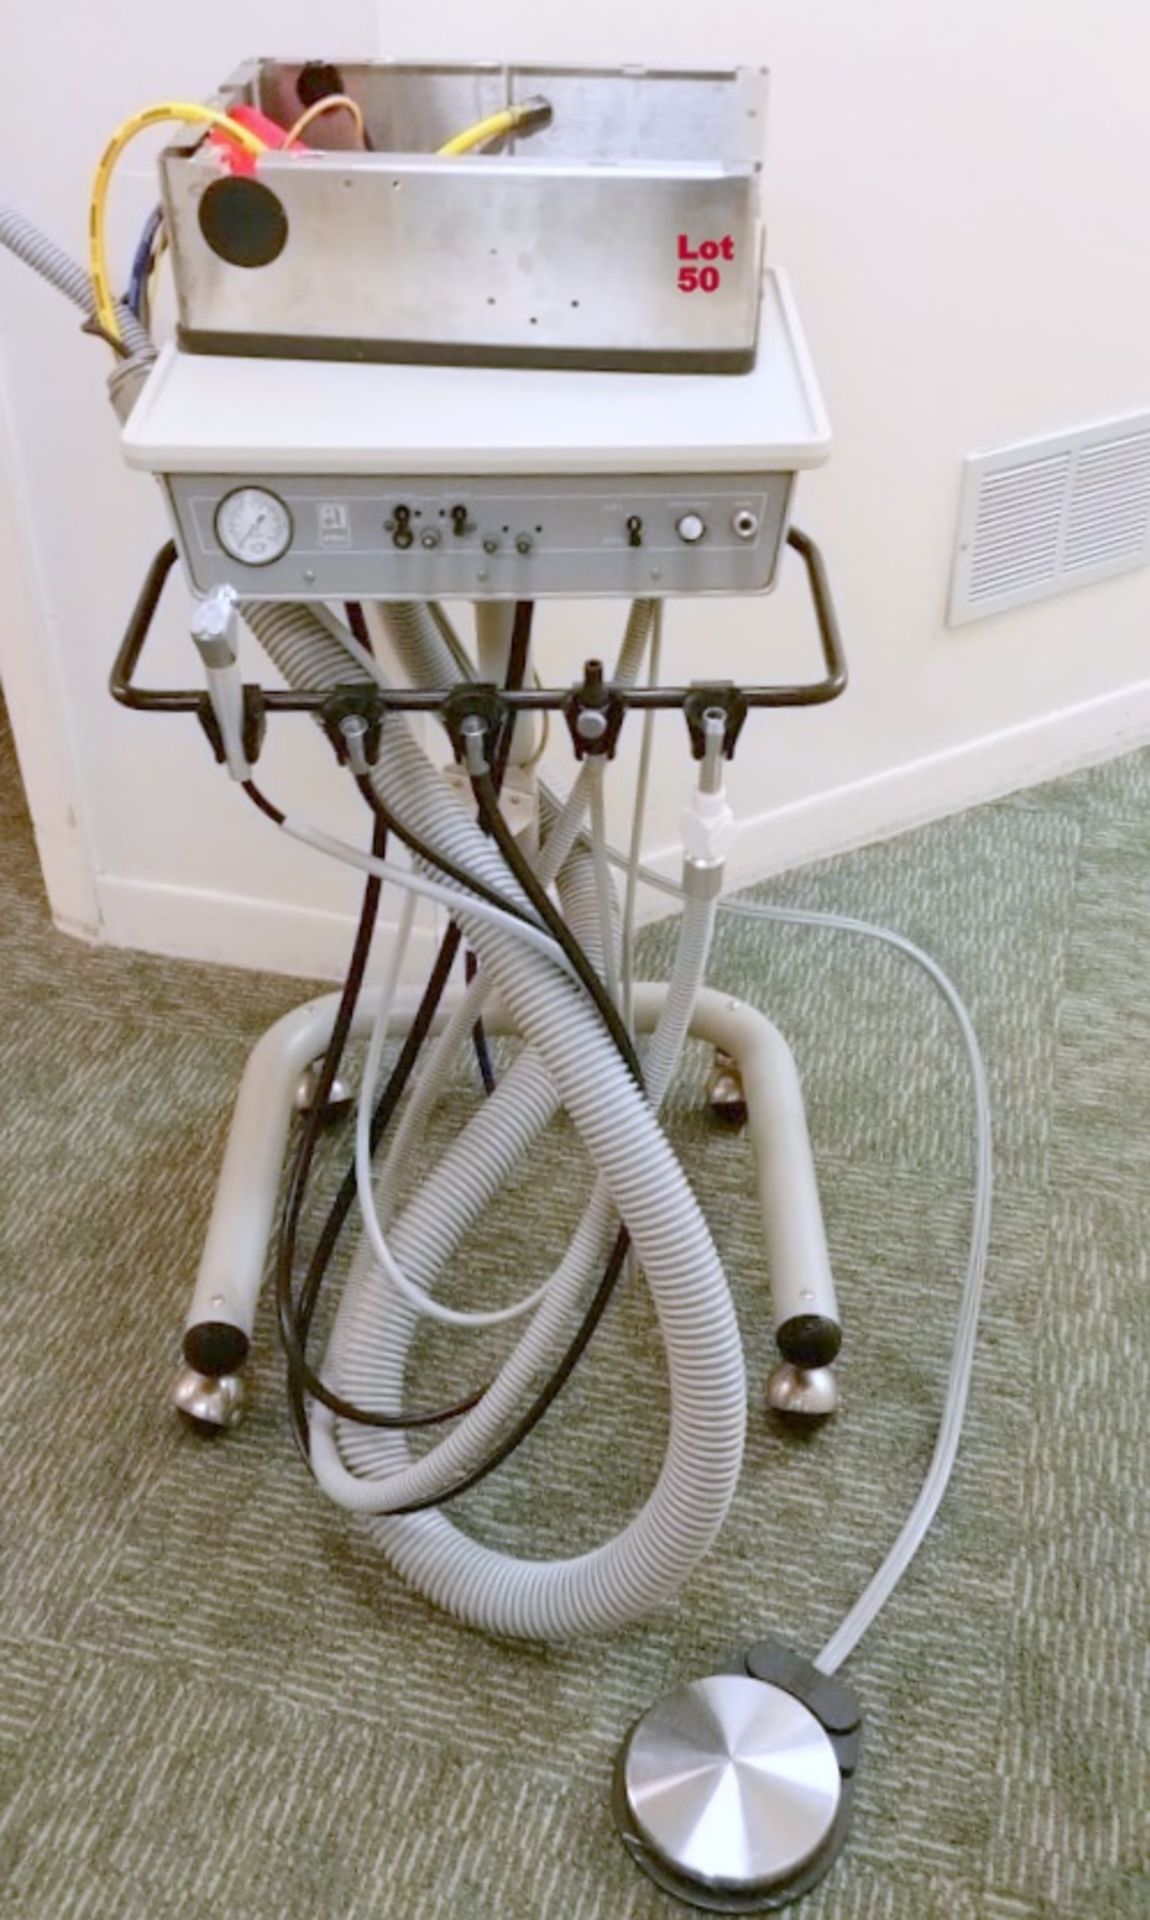 Adec Dental Delivery System with electrical box and handpiece